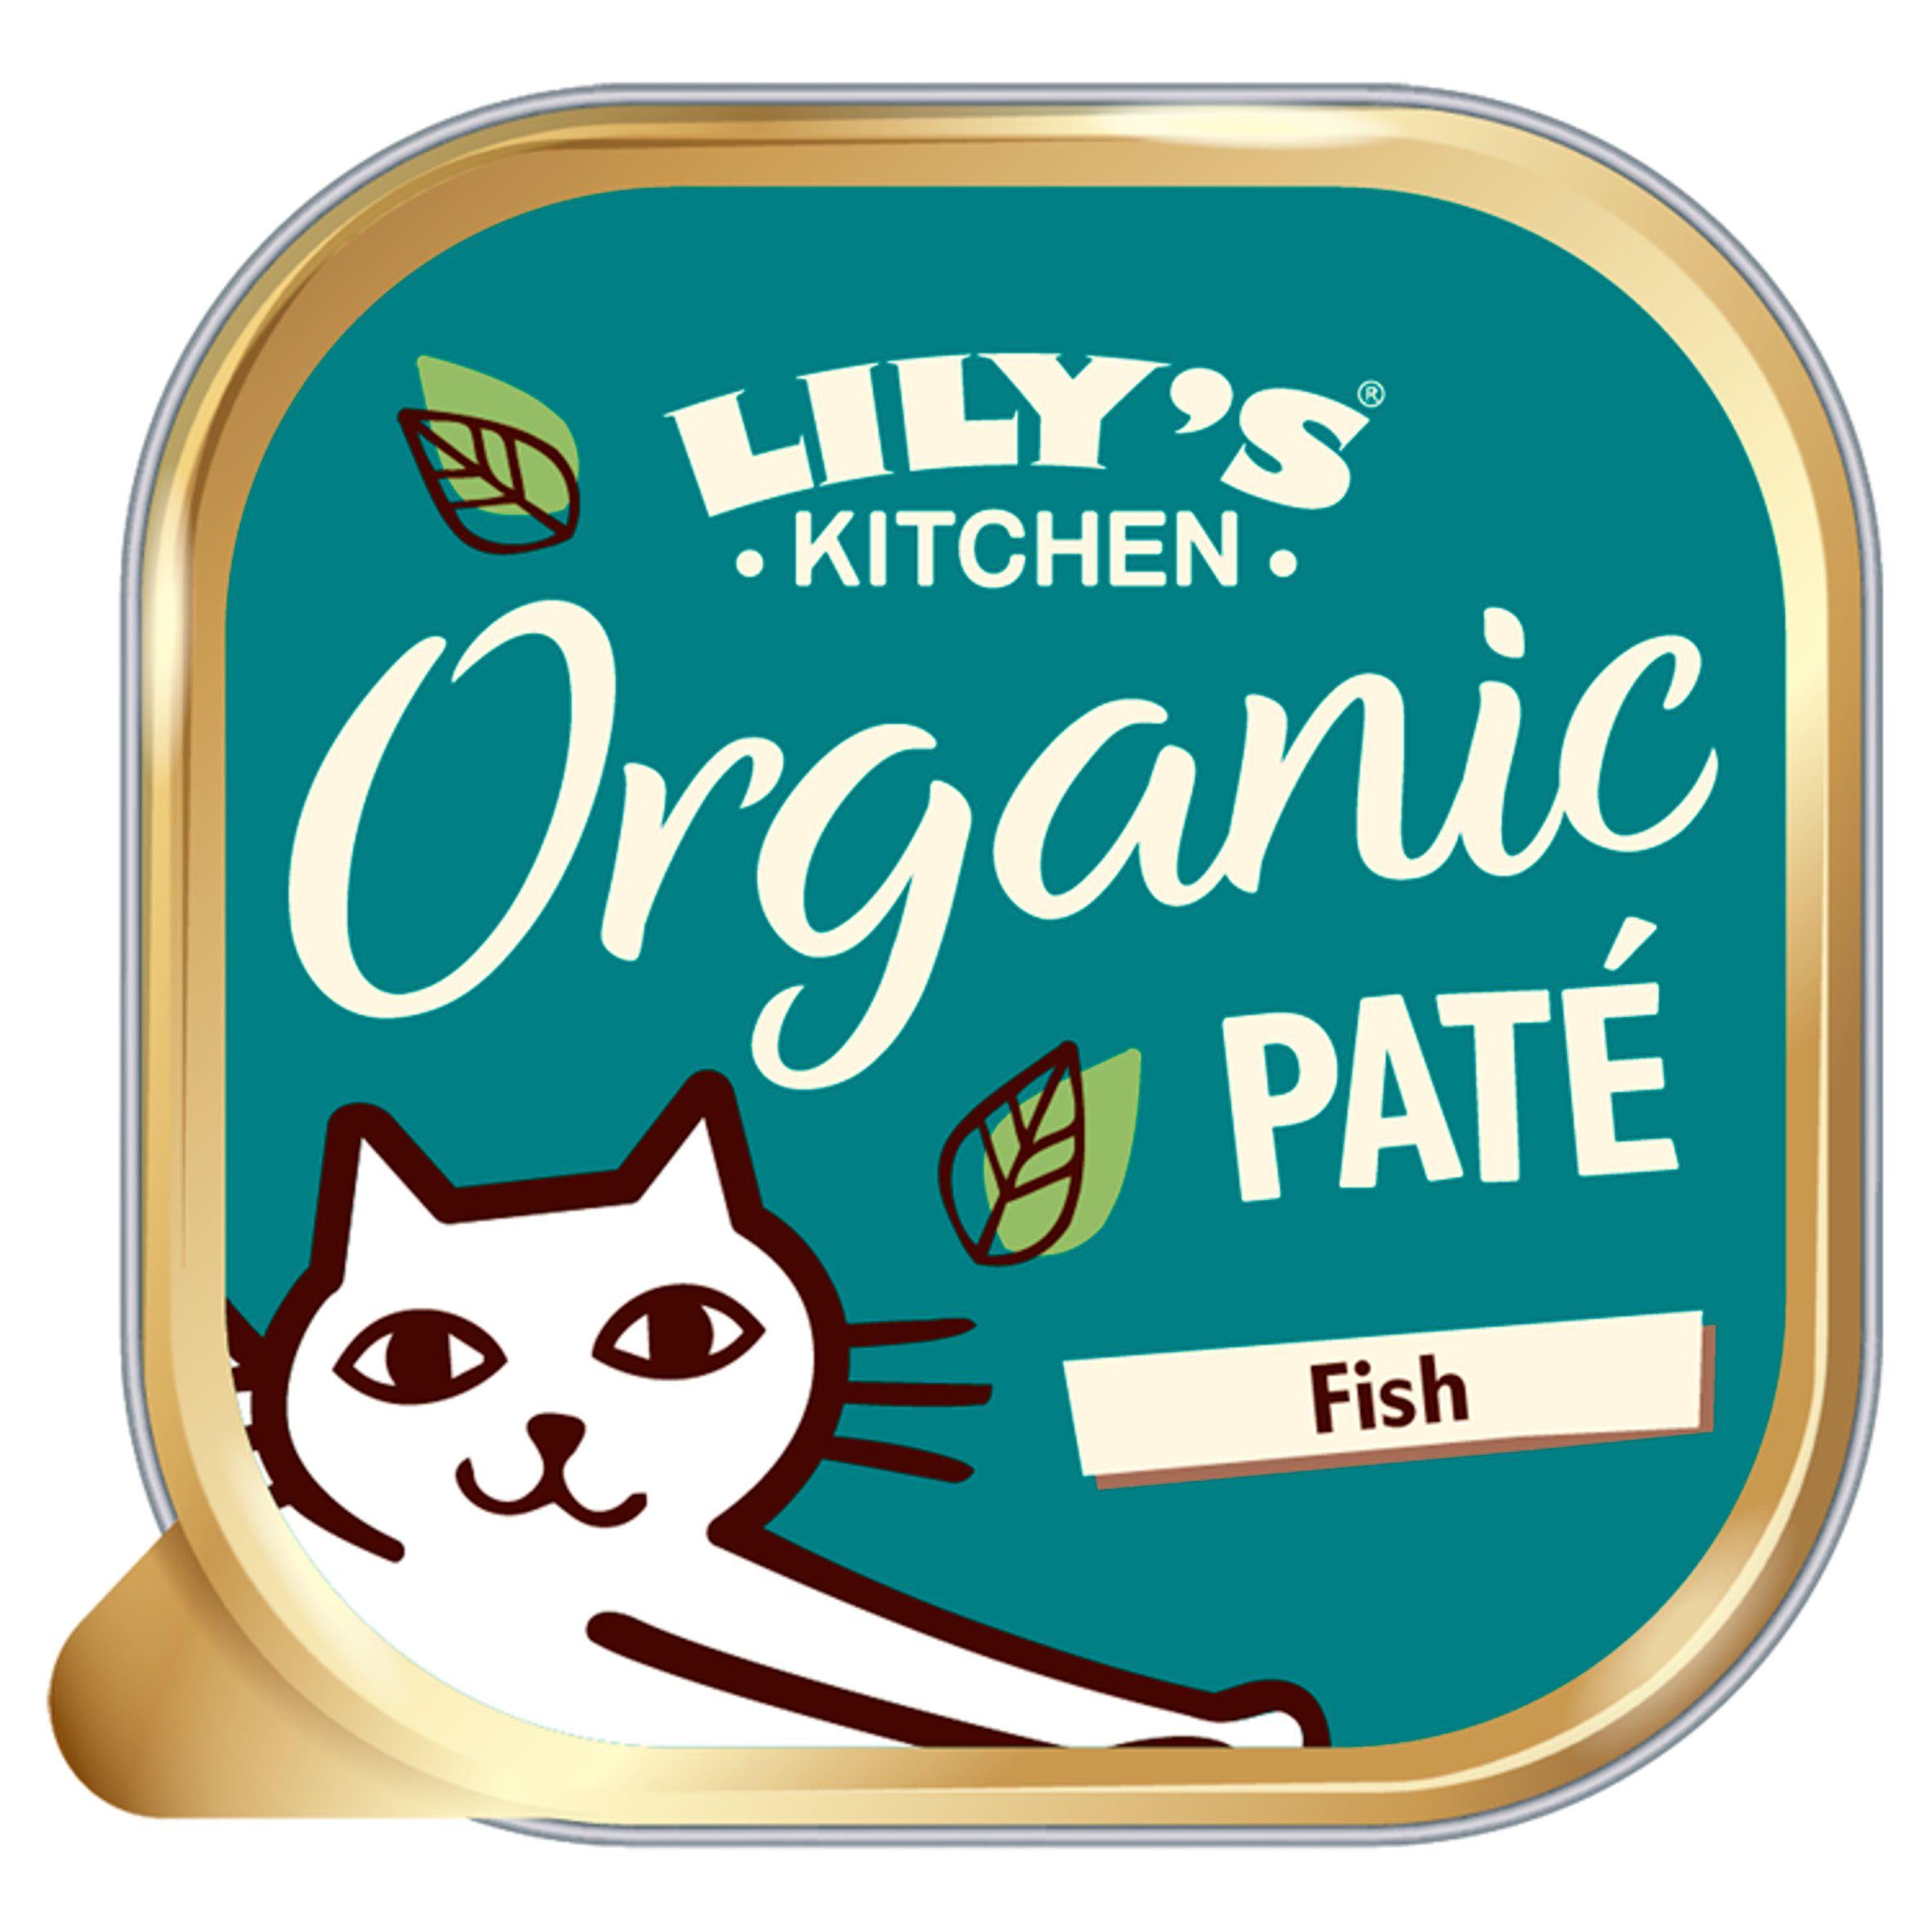 Lily's Kitchen Organic Pate for Cats 85g